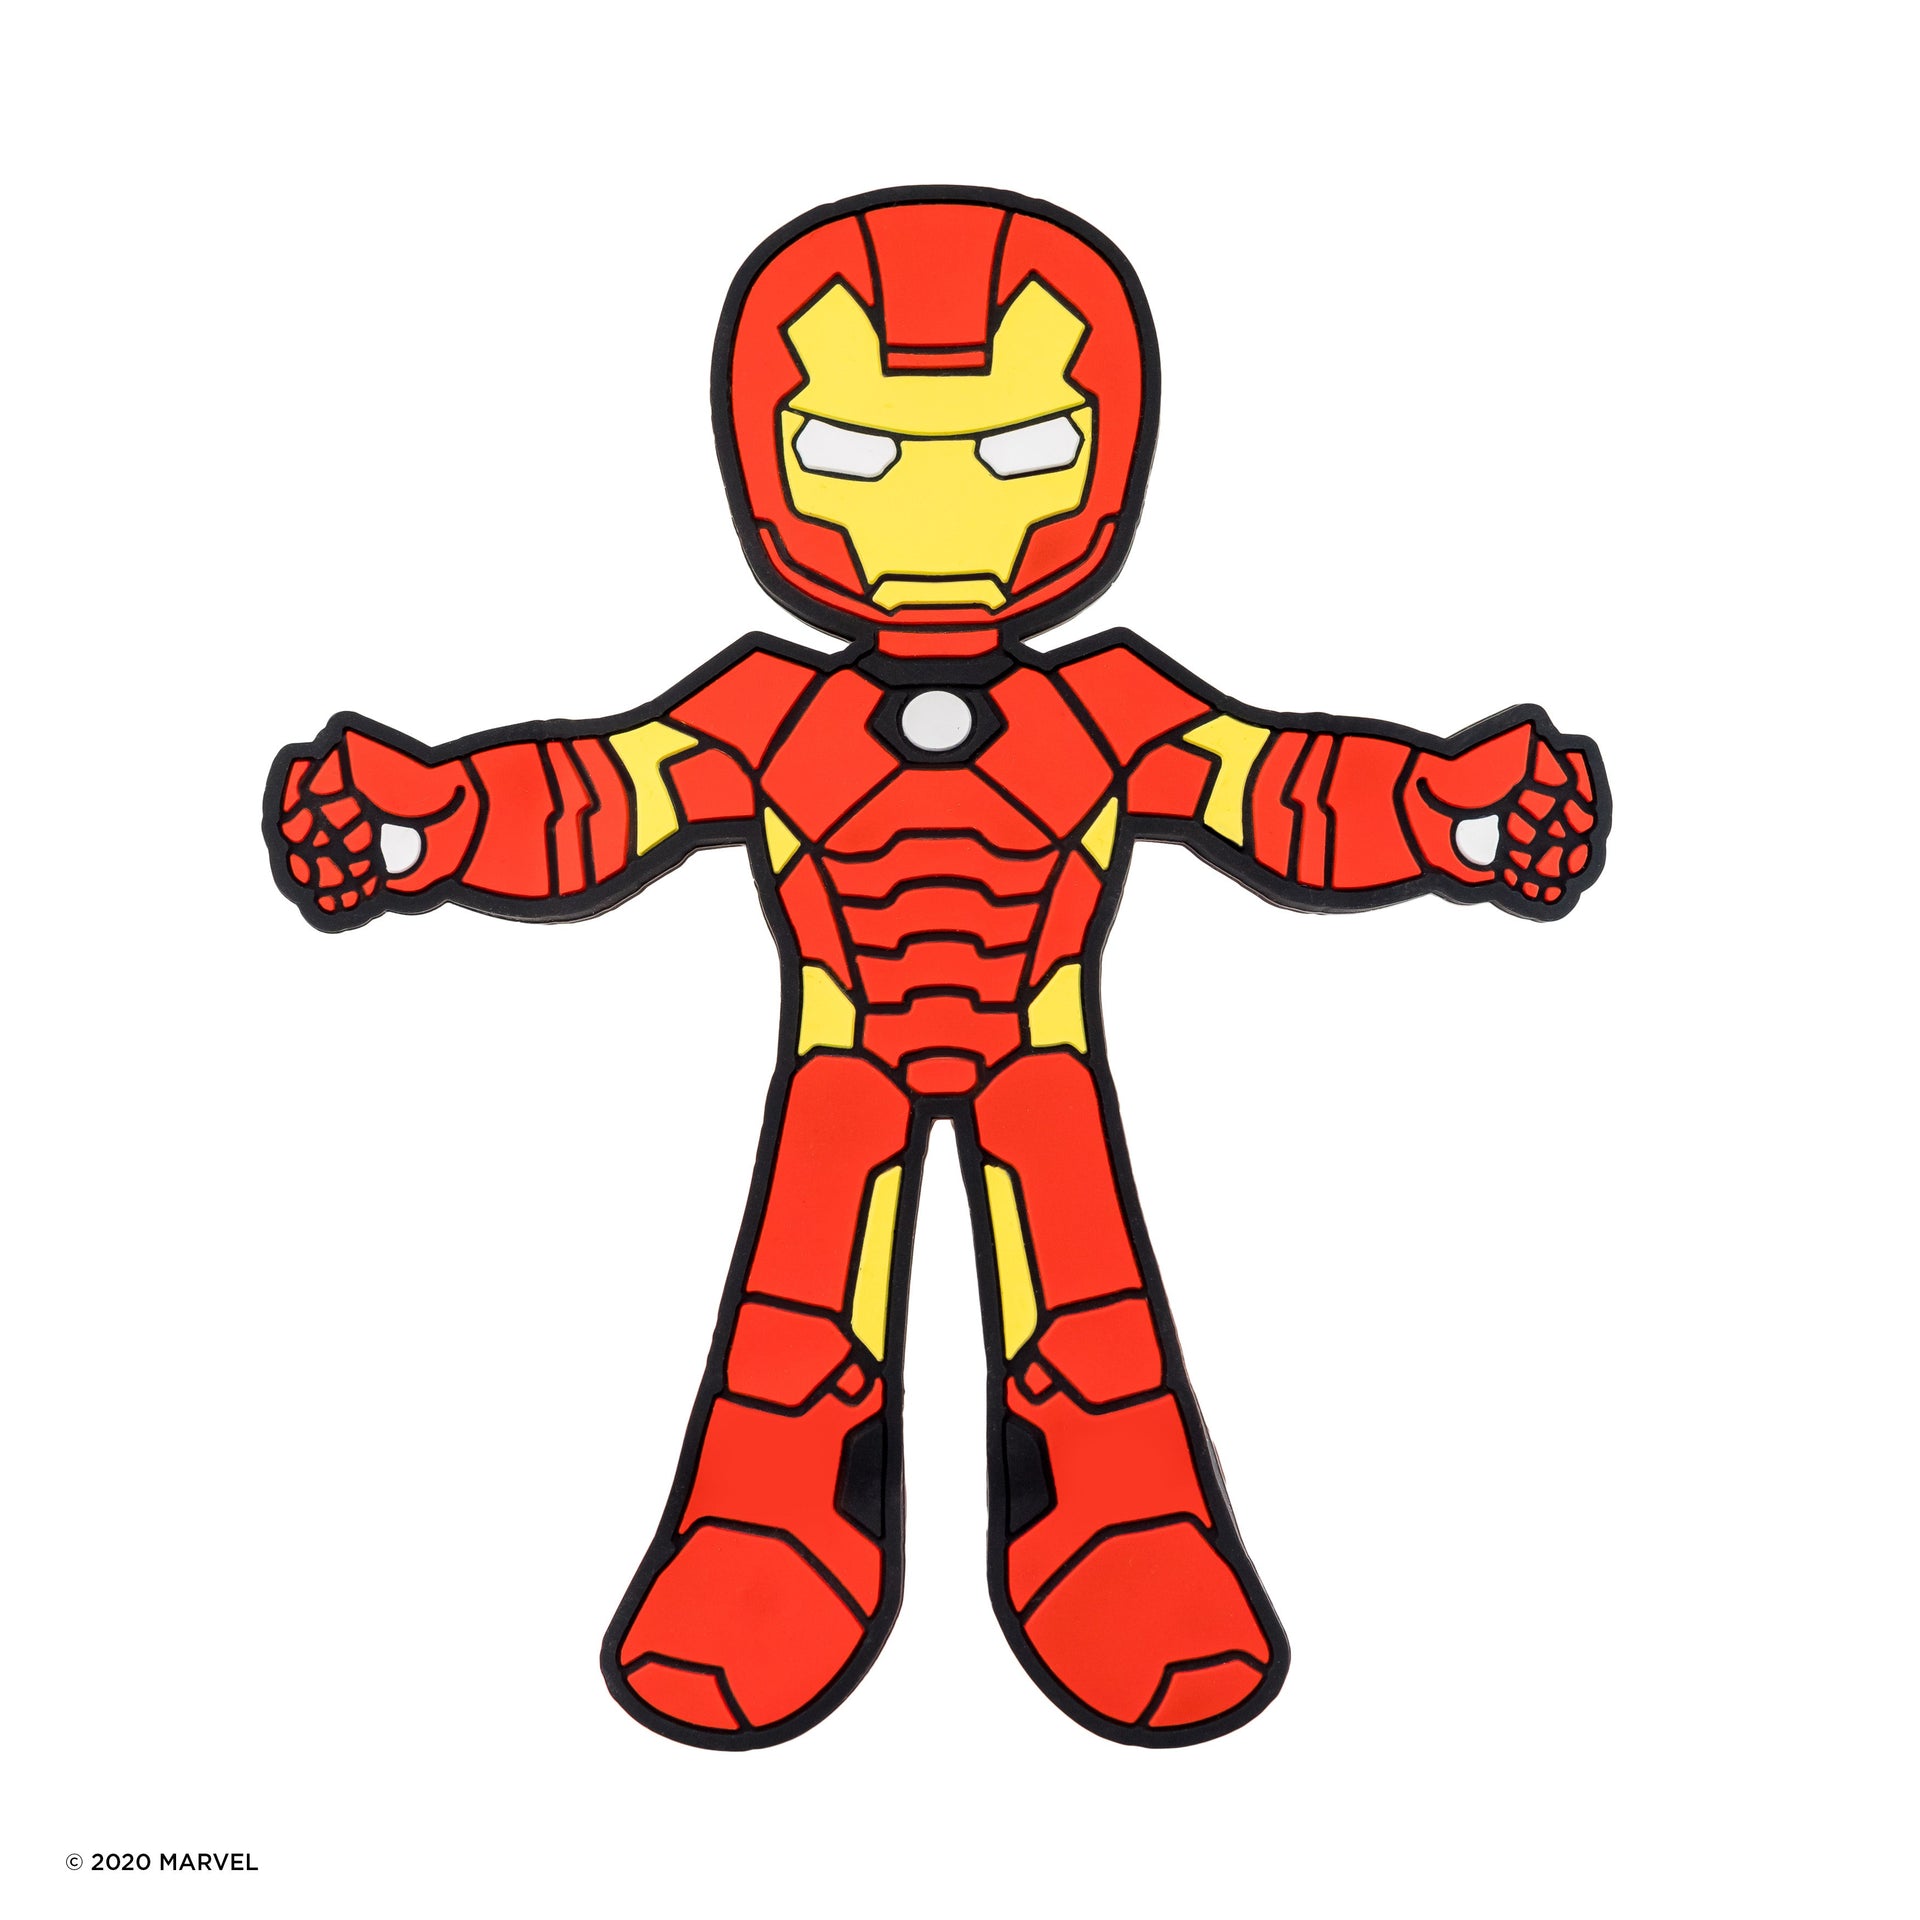 Image of Marvel Comics Iron Man Hug Buddy on a white background with arms and legs in the open position.